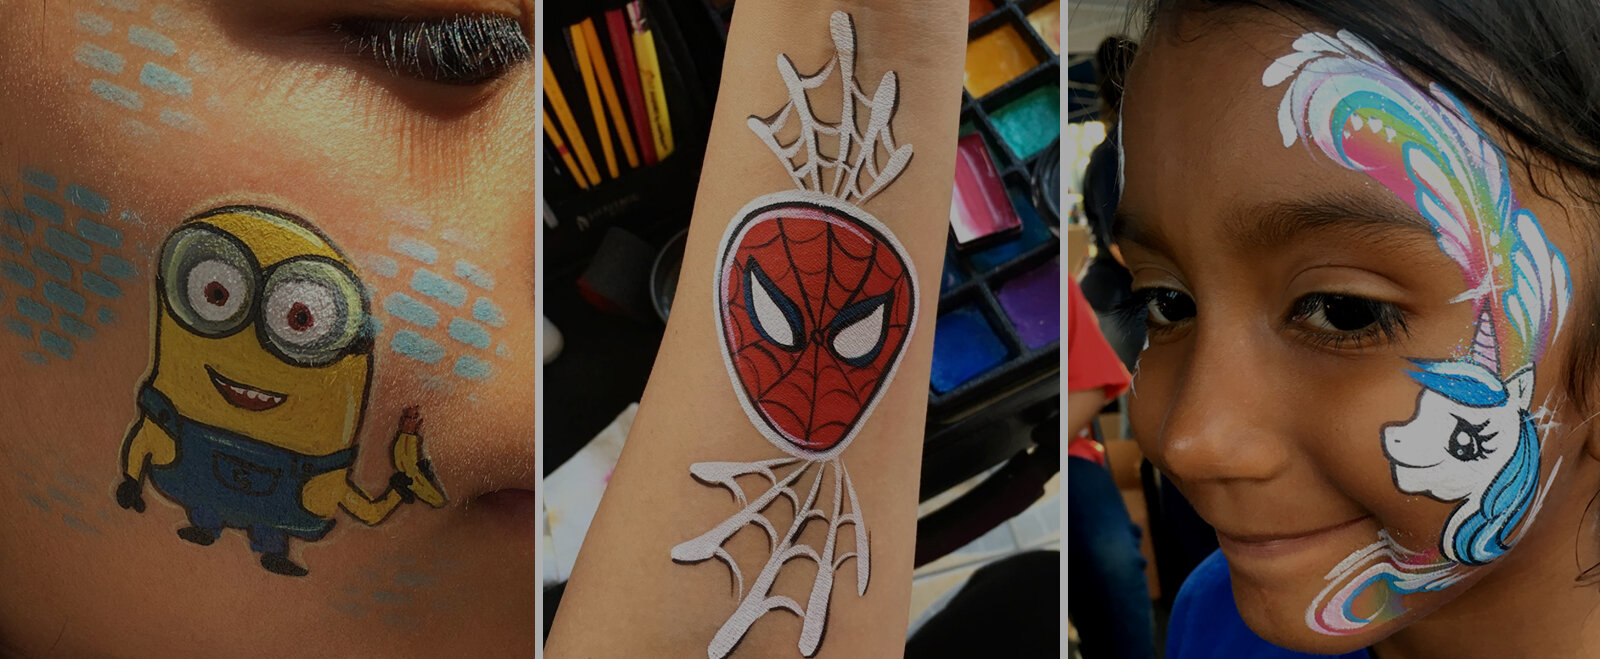 Face Painting Eugene Oregon for Hire